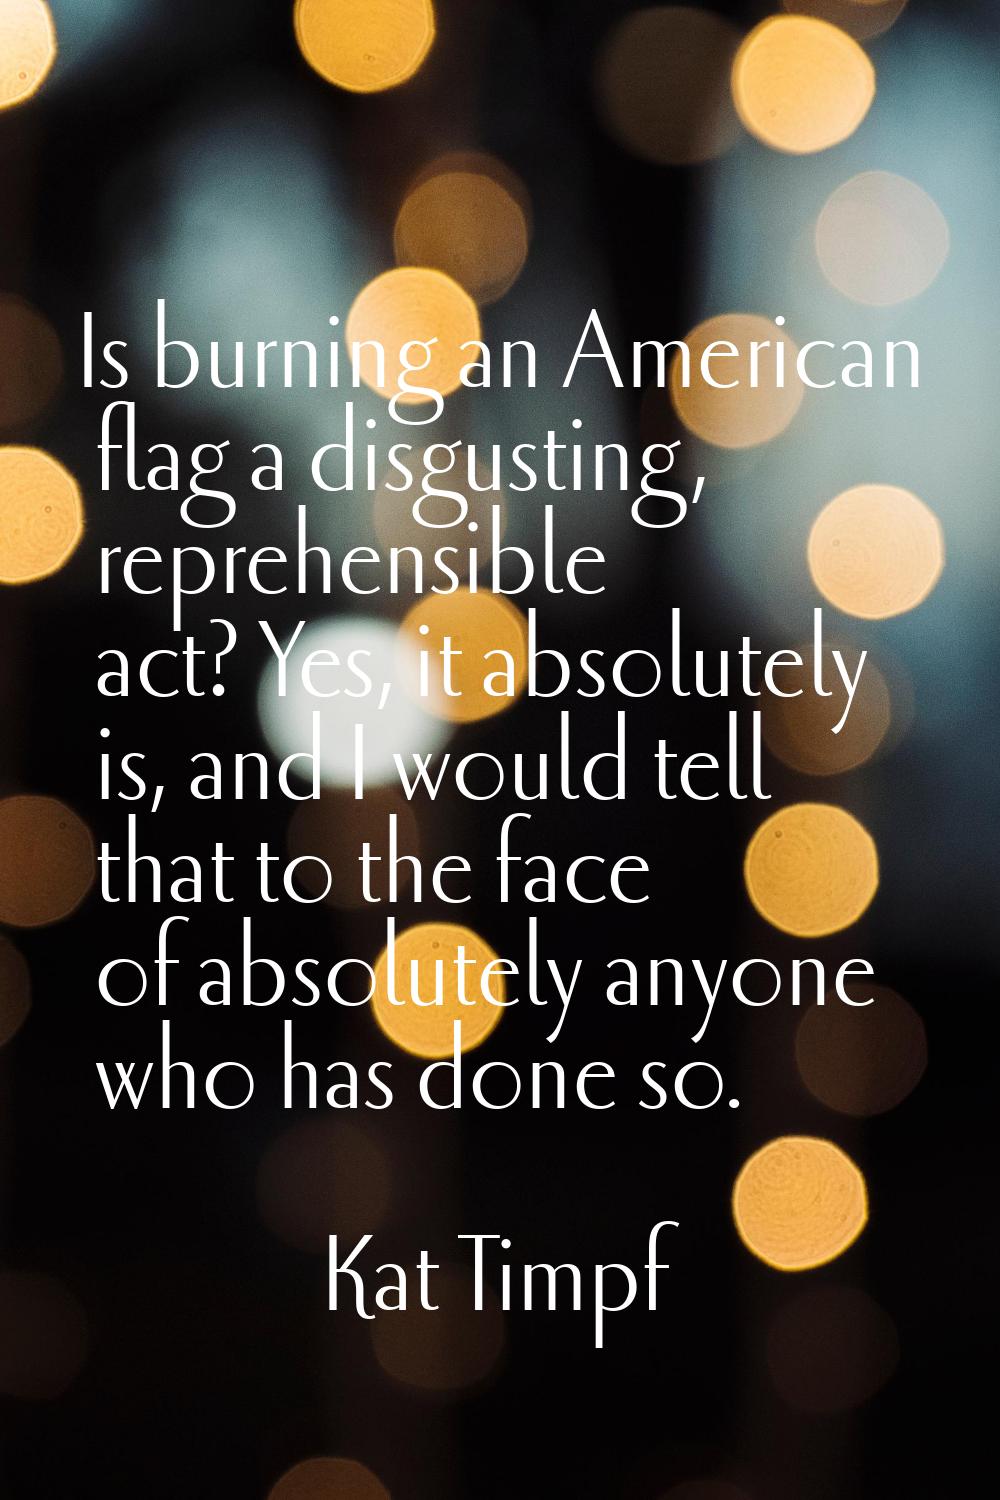 Is burning an American flag a disgusting, reprehensible act? Yes, it absolutely is, and I would tel